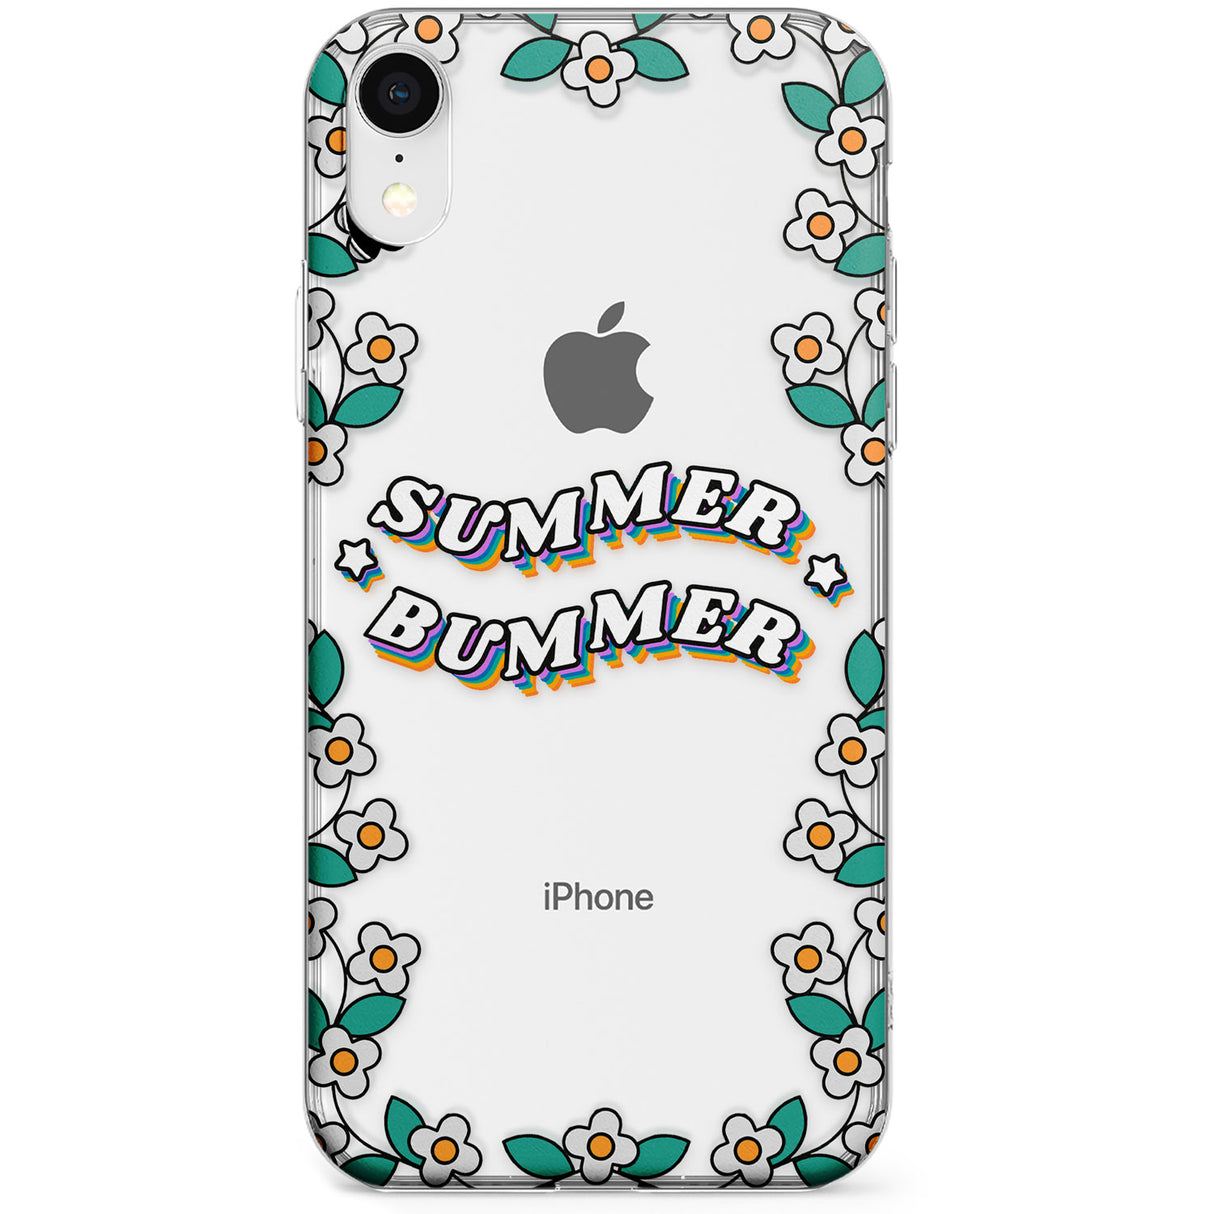 Summer Bummer Phone Case for iPhone X, XS Max, XR